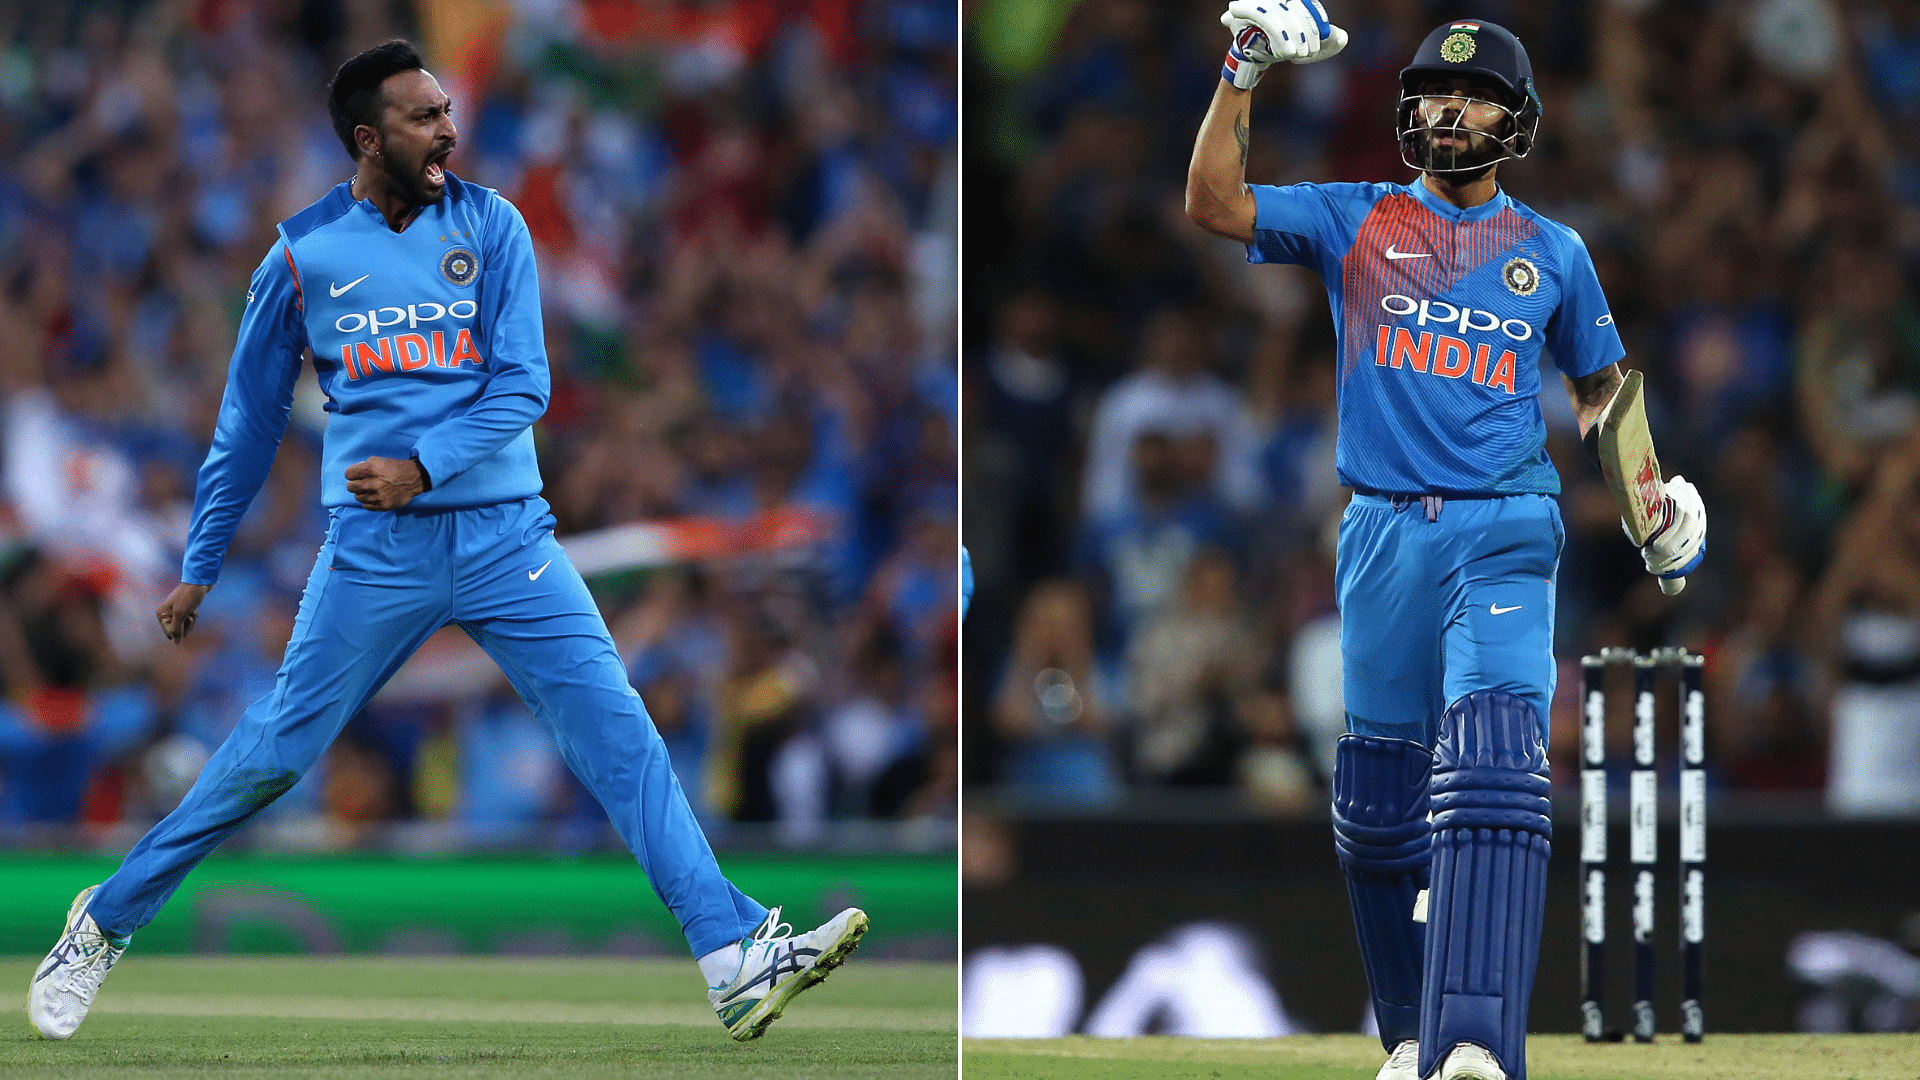 Krunal Pandya and Virat Kohli were the architects of India’s series-levelling win vs Australia in the third T20I at Sydney